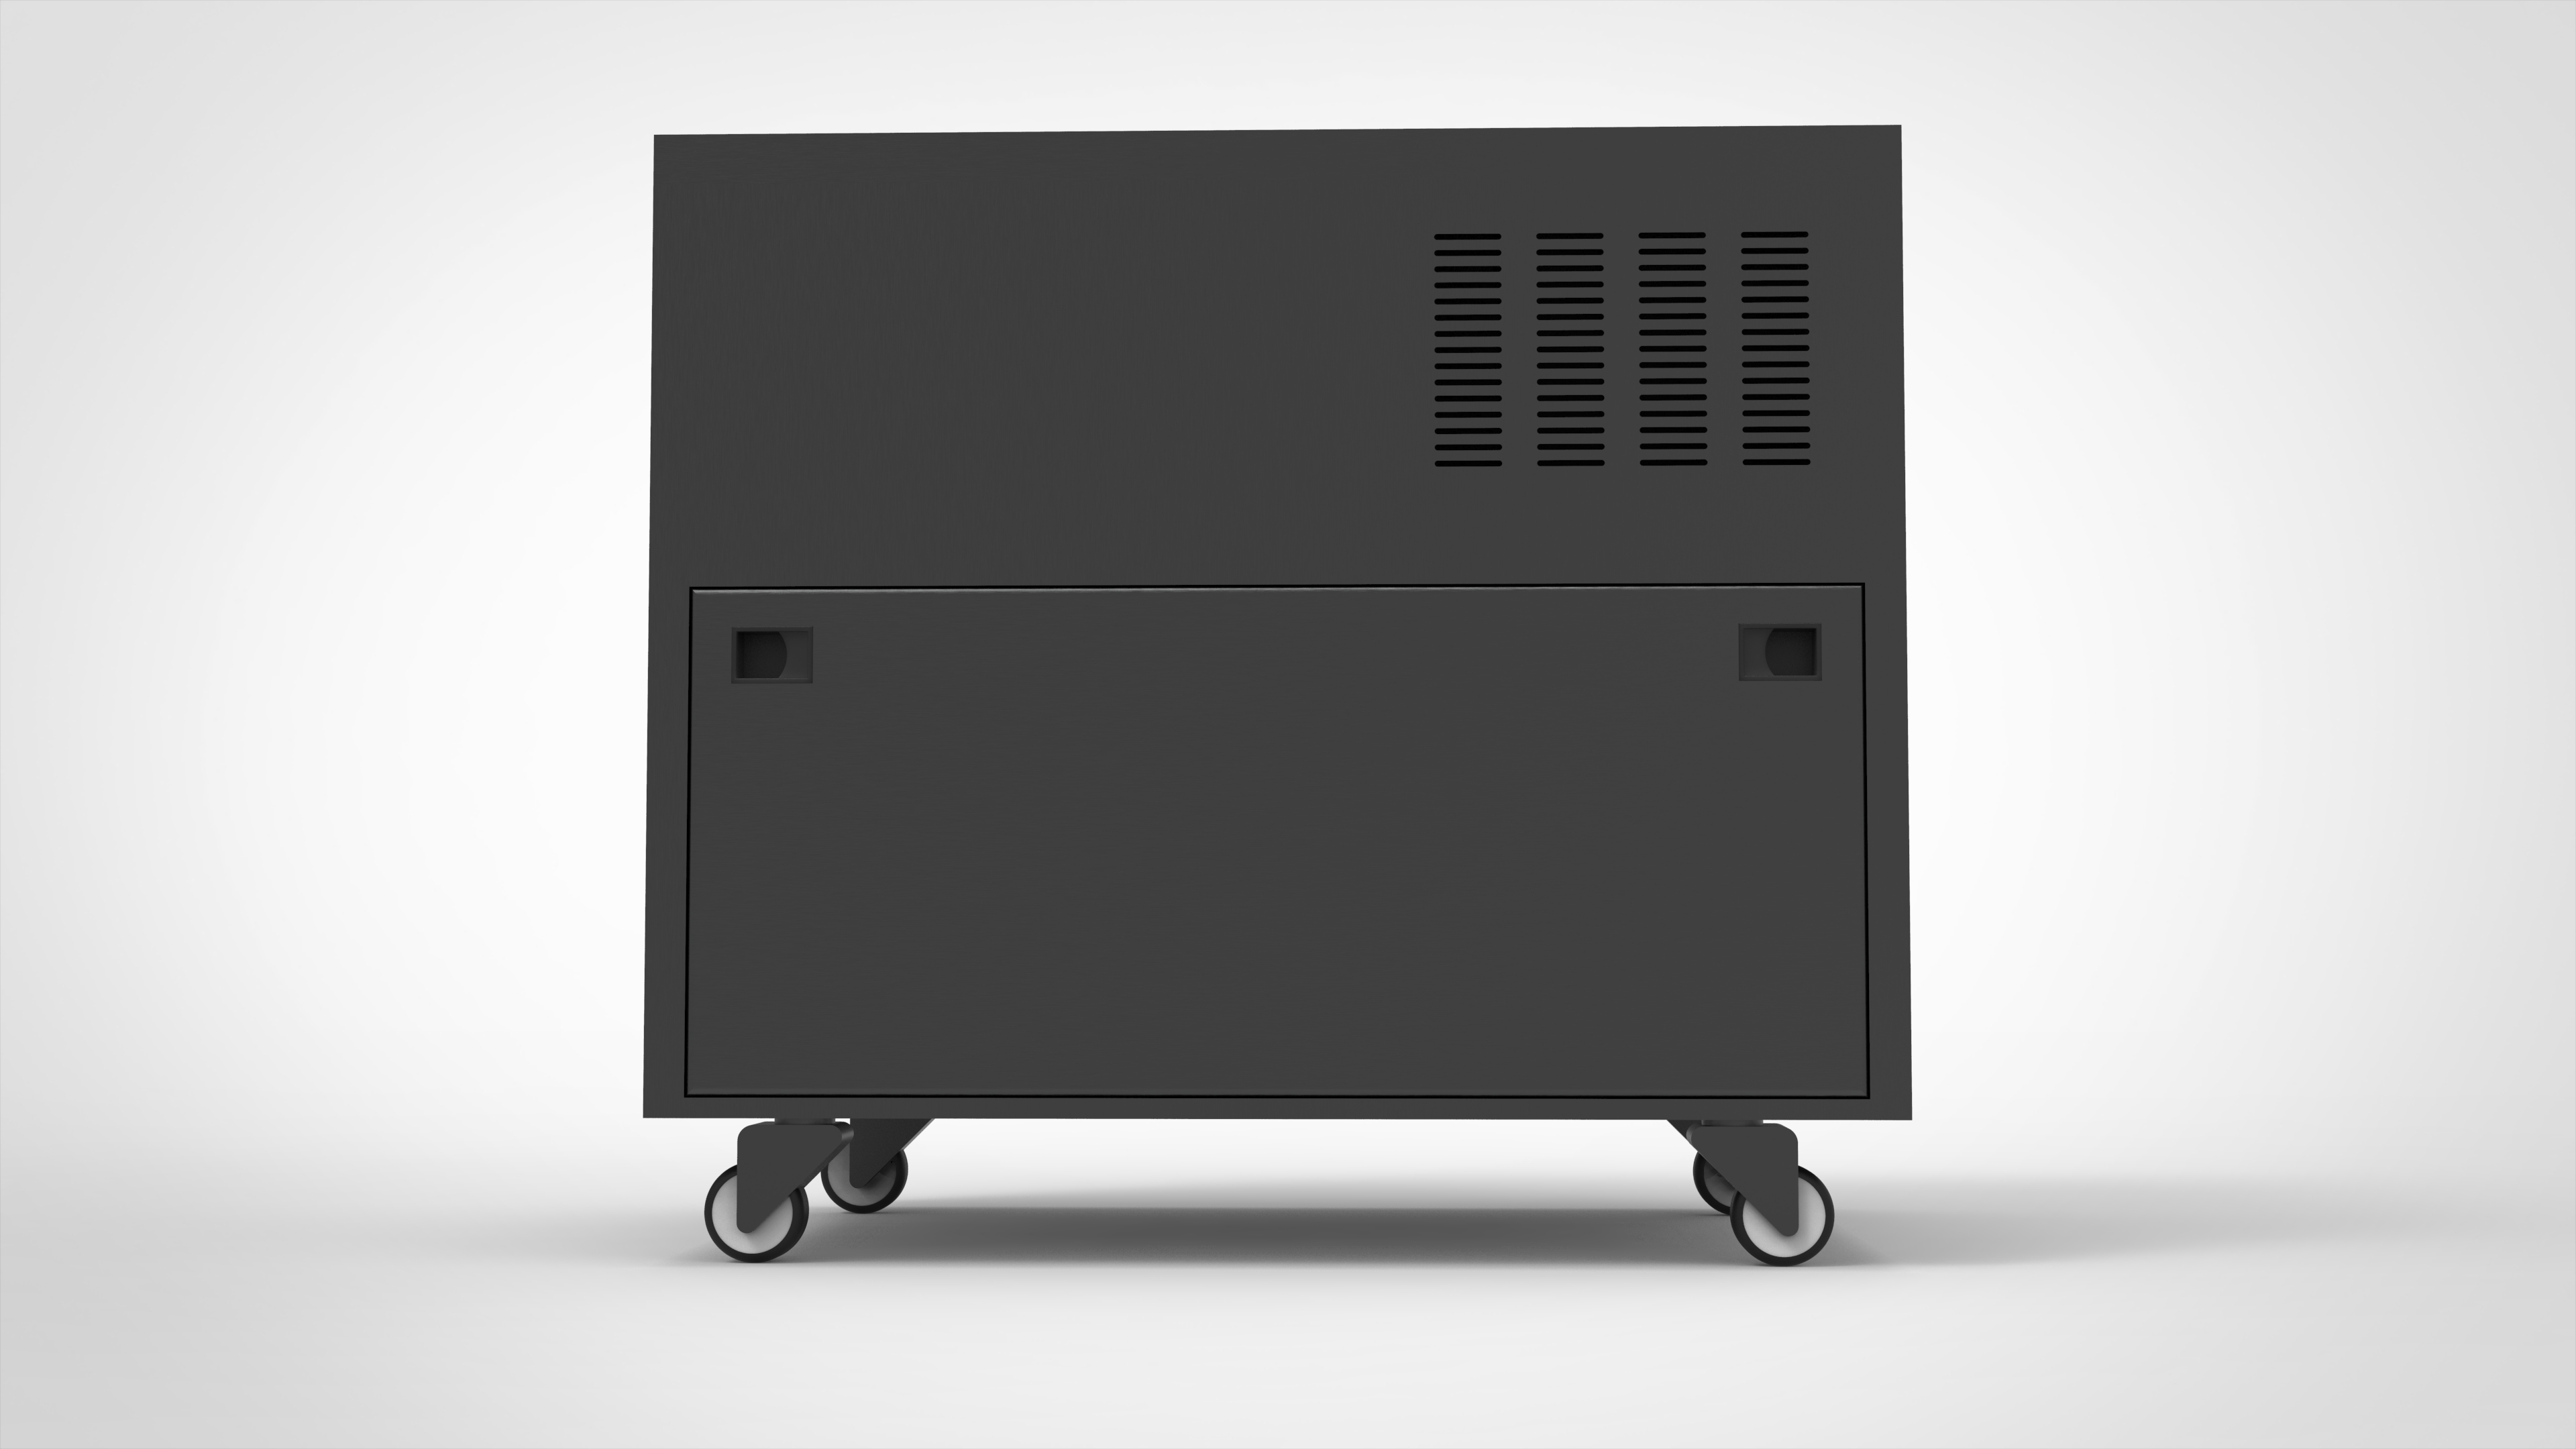 5000w 5000wh with Battery Ports in One Solar Power System for Vehicle